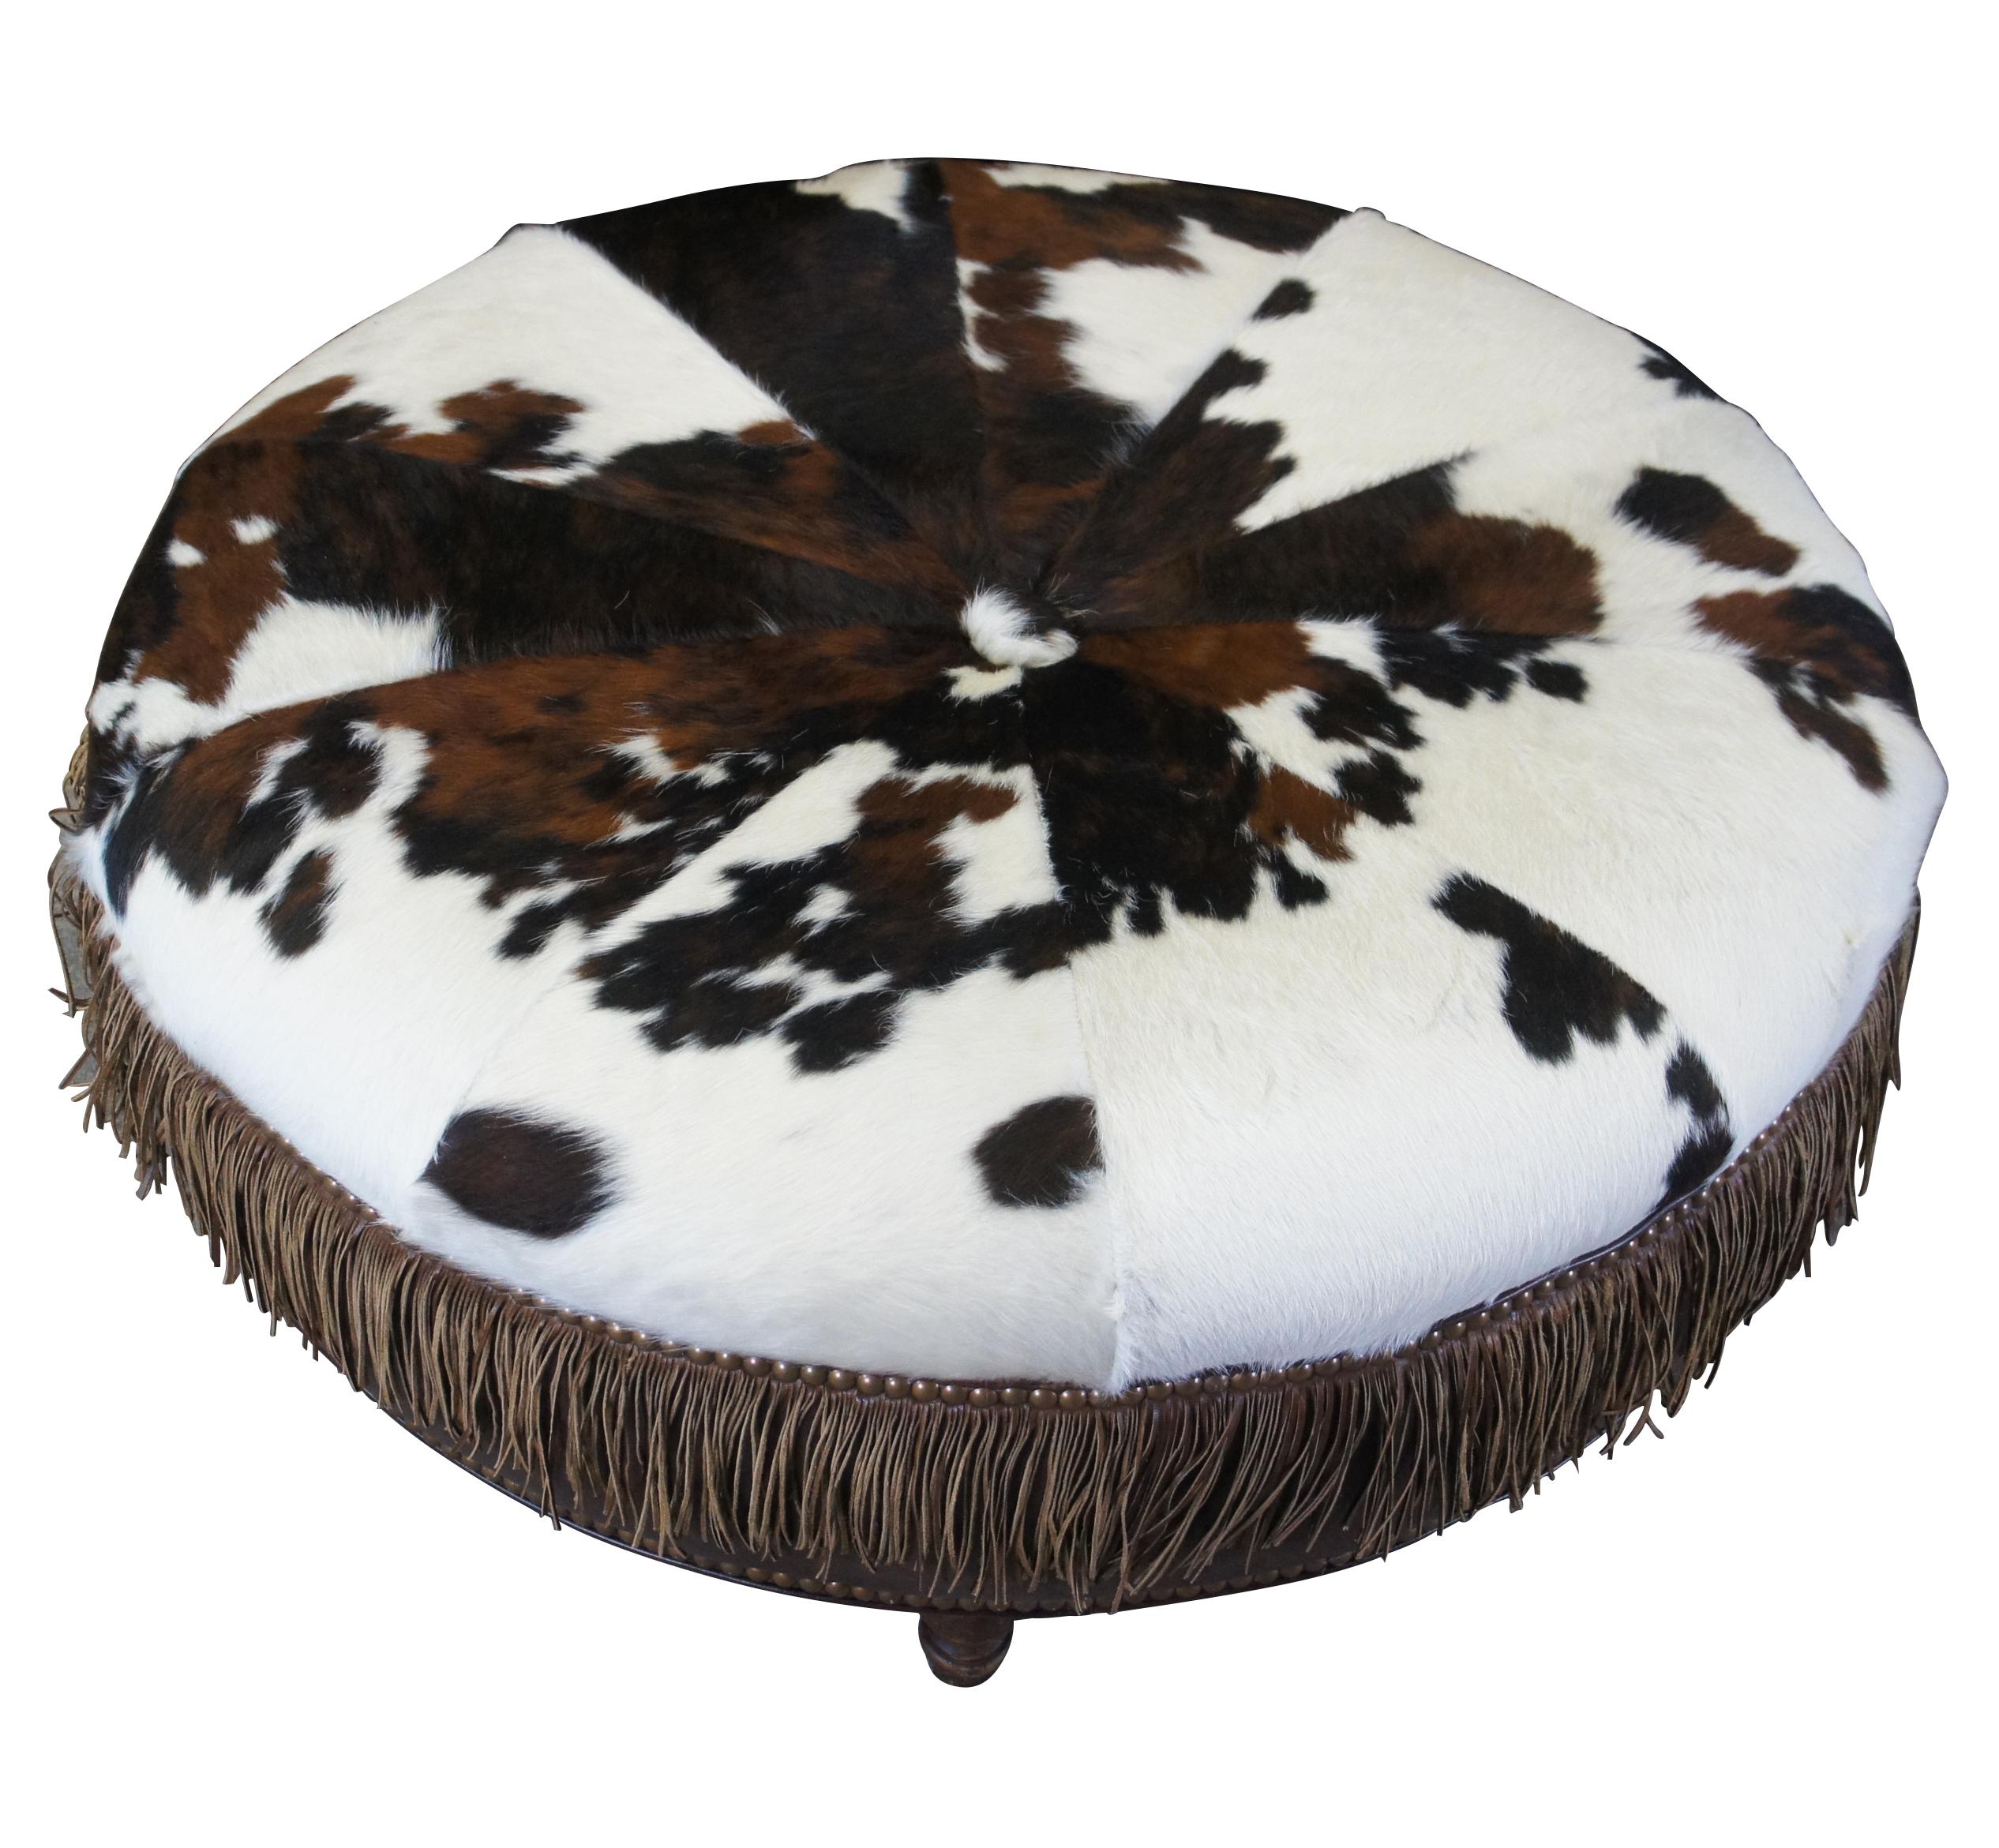 Vintage brown leather and brindled cowhide ottoman / coffee table. Attributed to Vanguard Furniture. Features a round form with button tuft and brown and white hide along the top. The sides are wrapped in a warm brown leather with two layers of